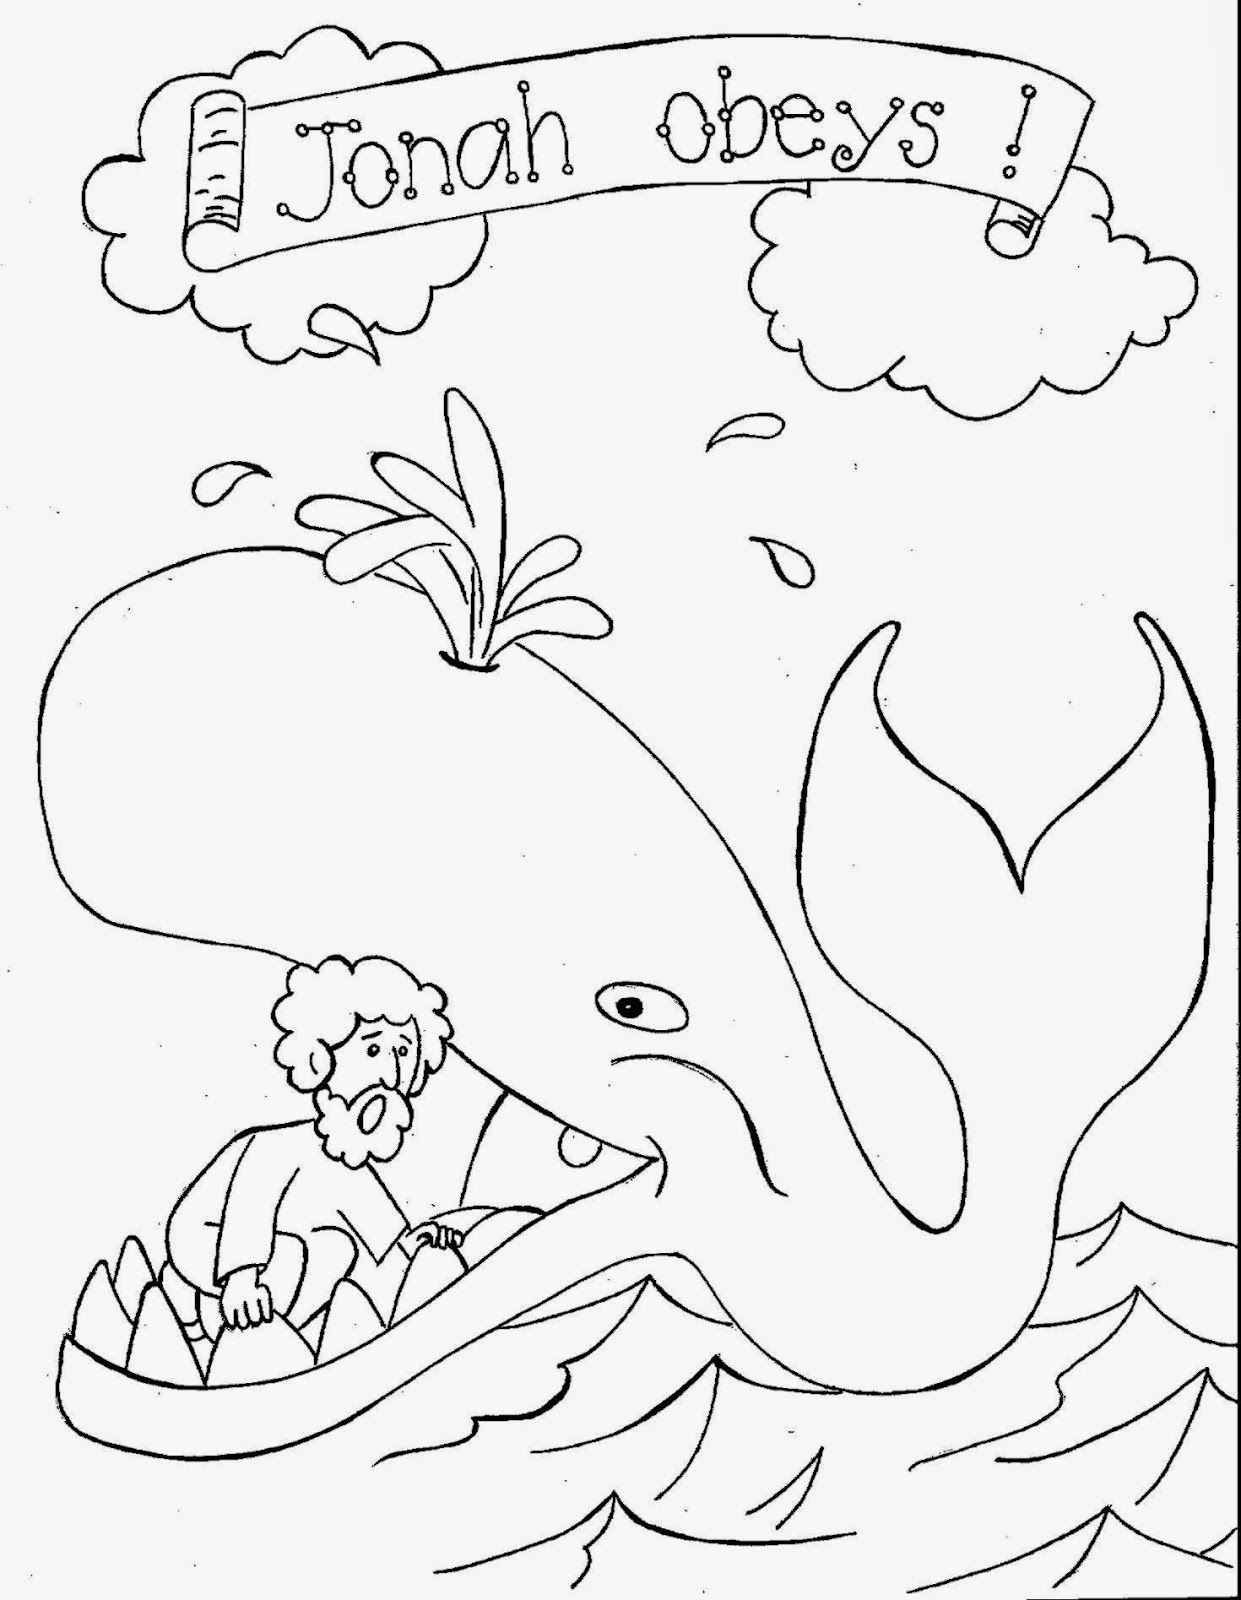 Bible Coloring Sheets For Kids | Free Coloring Sheet